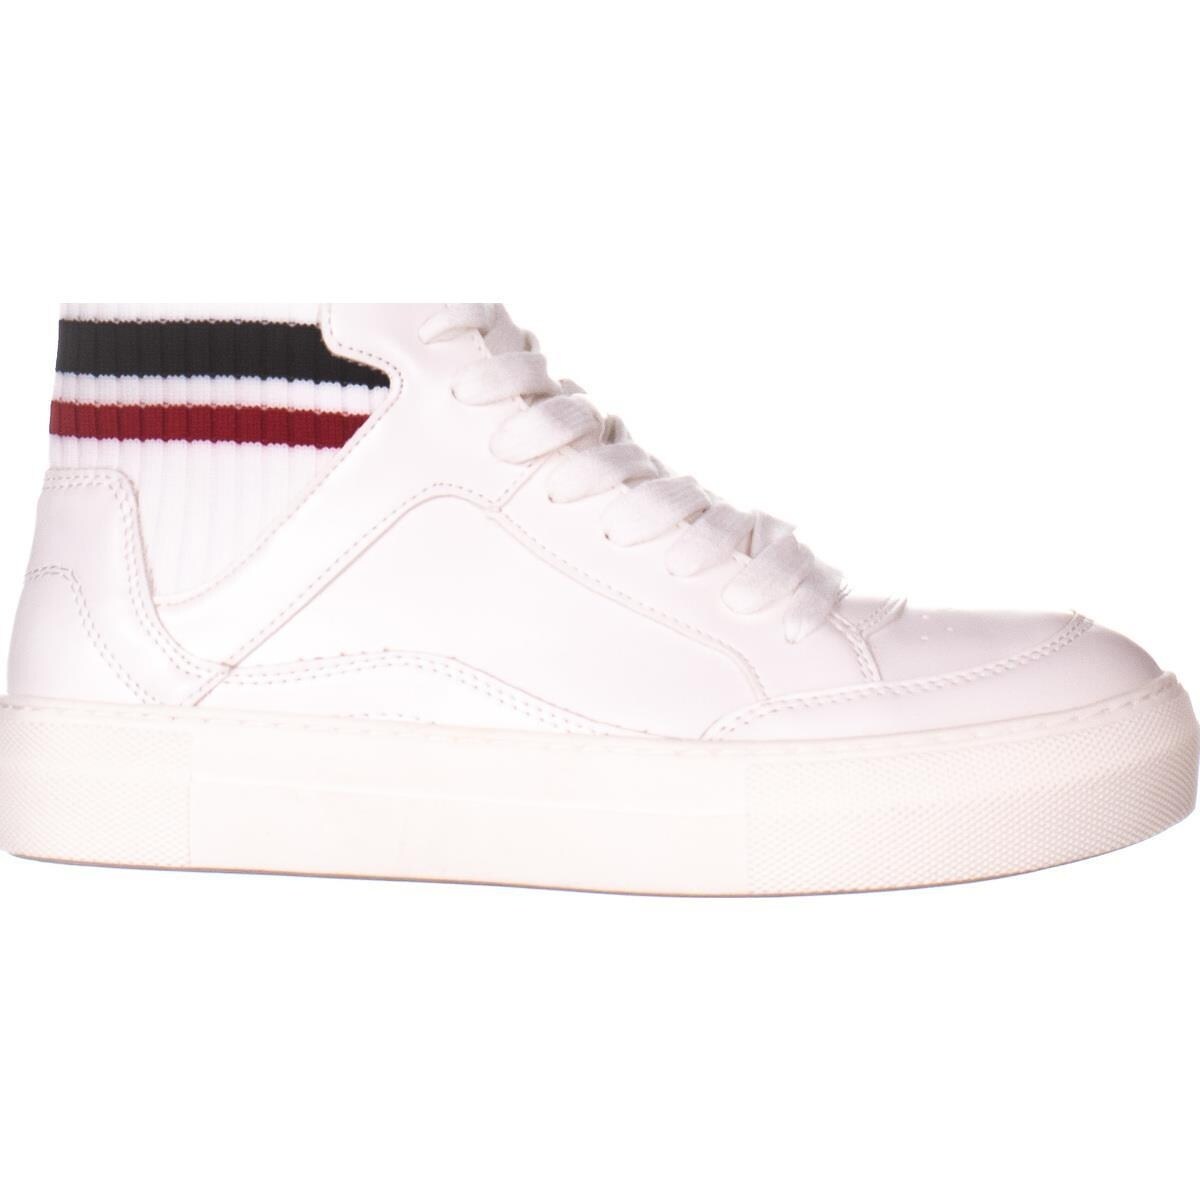 madden girl high top sneakers